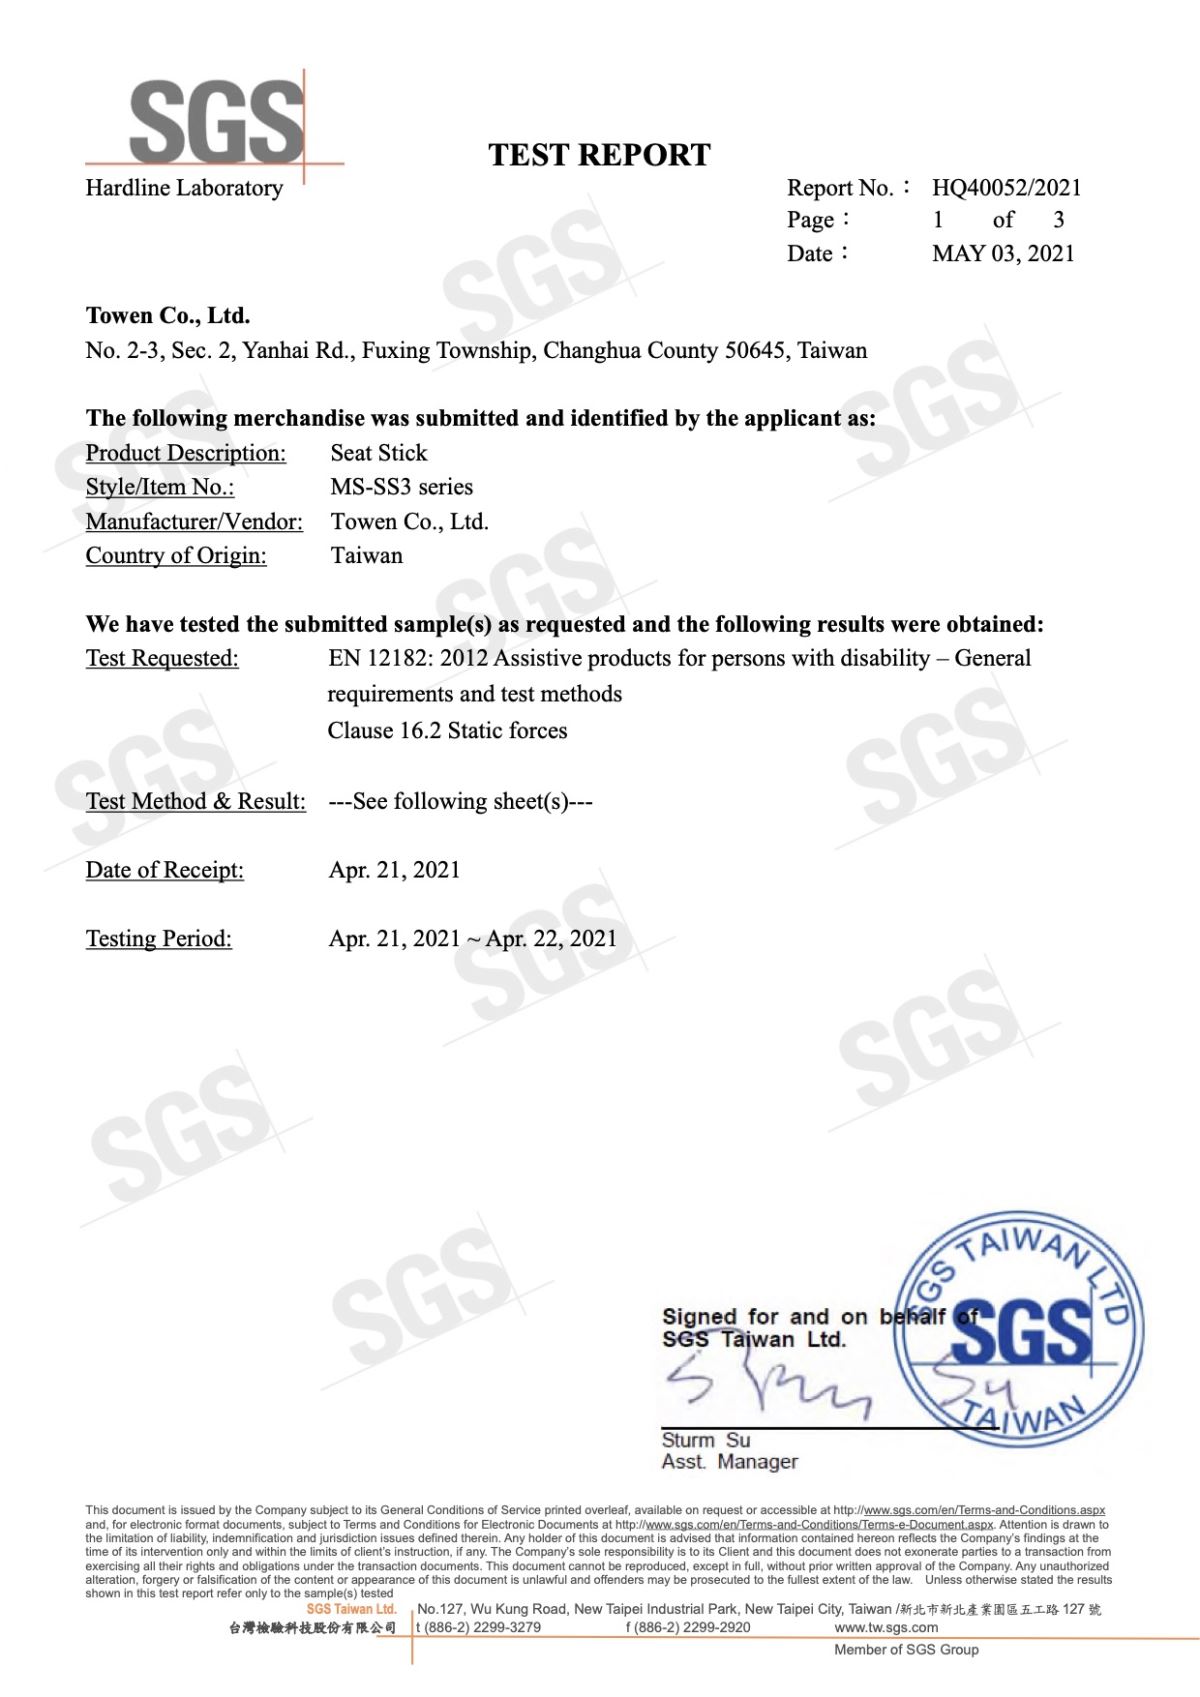 load test report by SGS